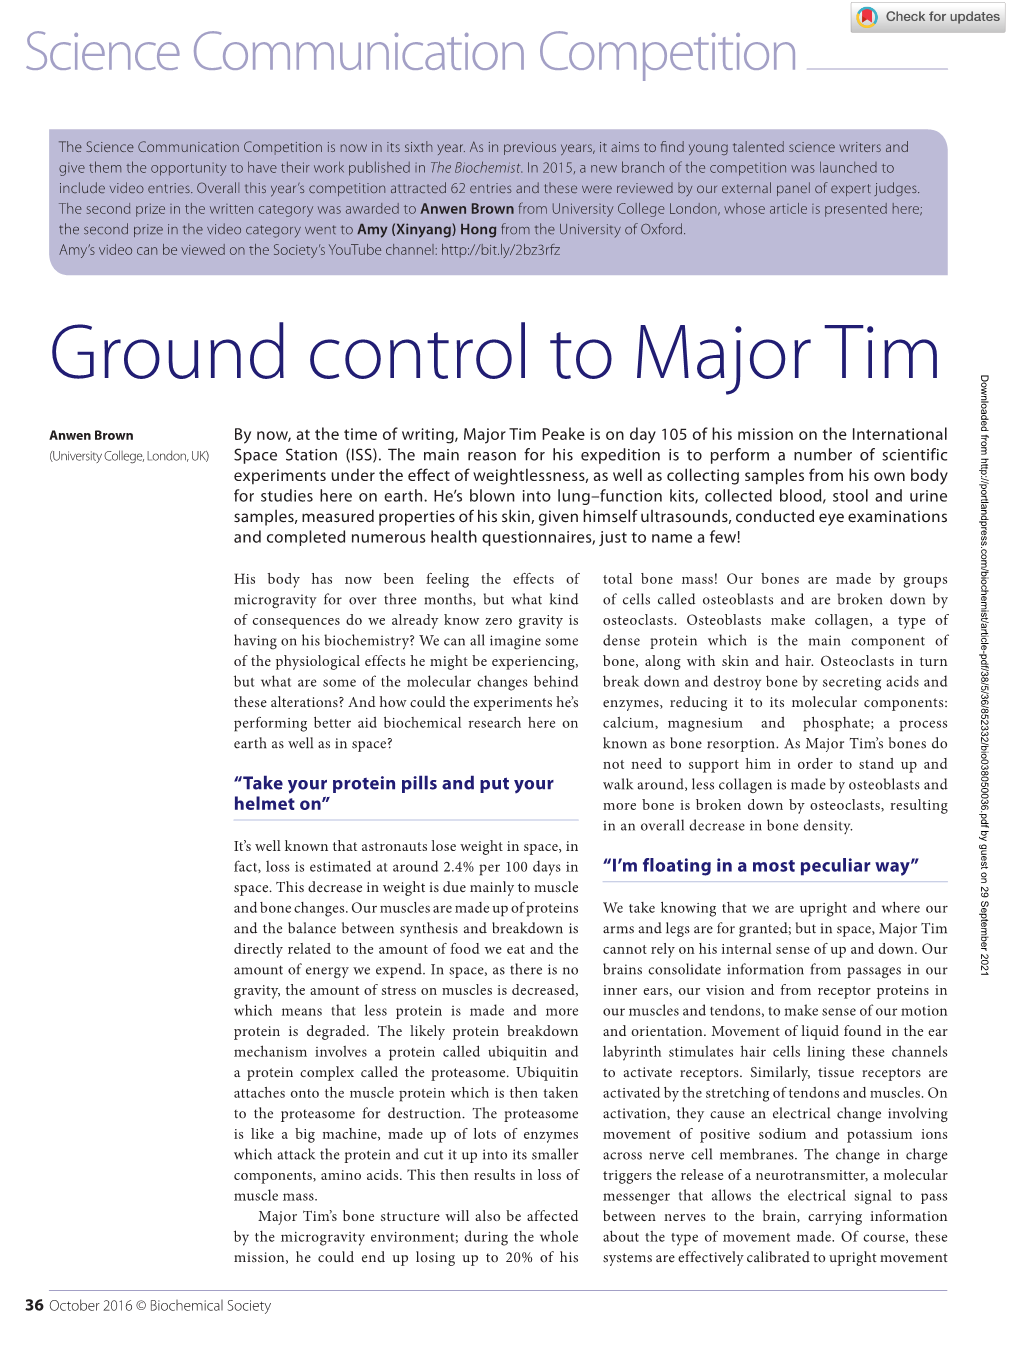 Ground Control to Major Tim Downloaded from by Guest on 29 September 2021